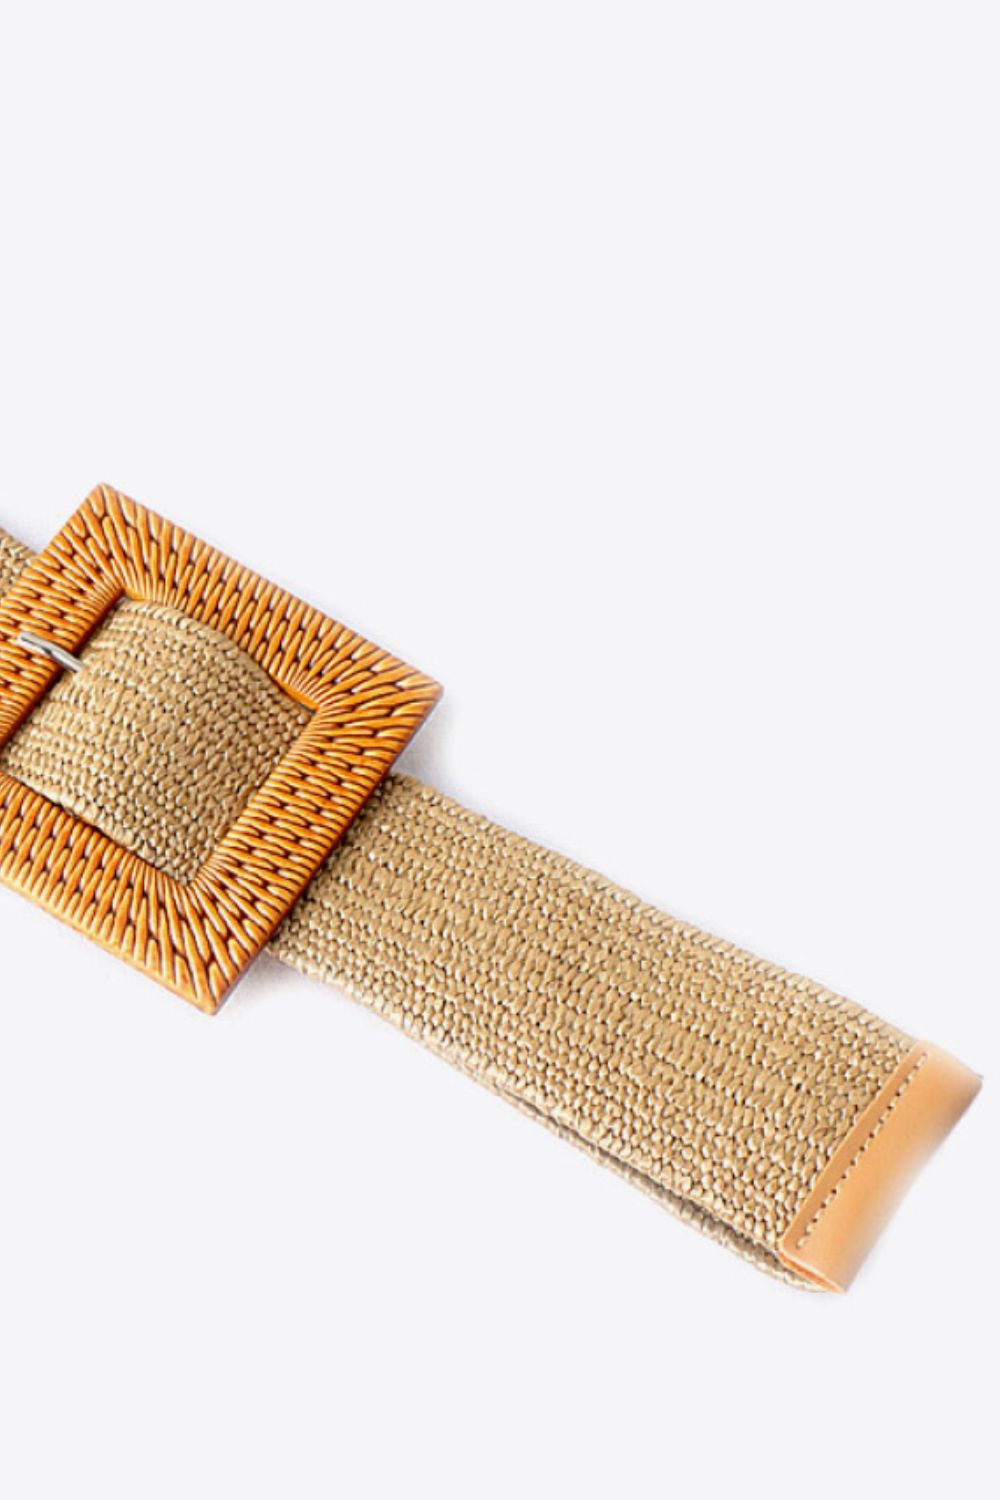 Square Buckle Elastic Braid Belt Print on any thing USA/STOD clothes